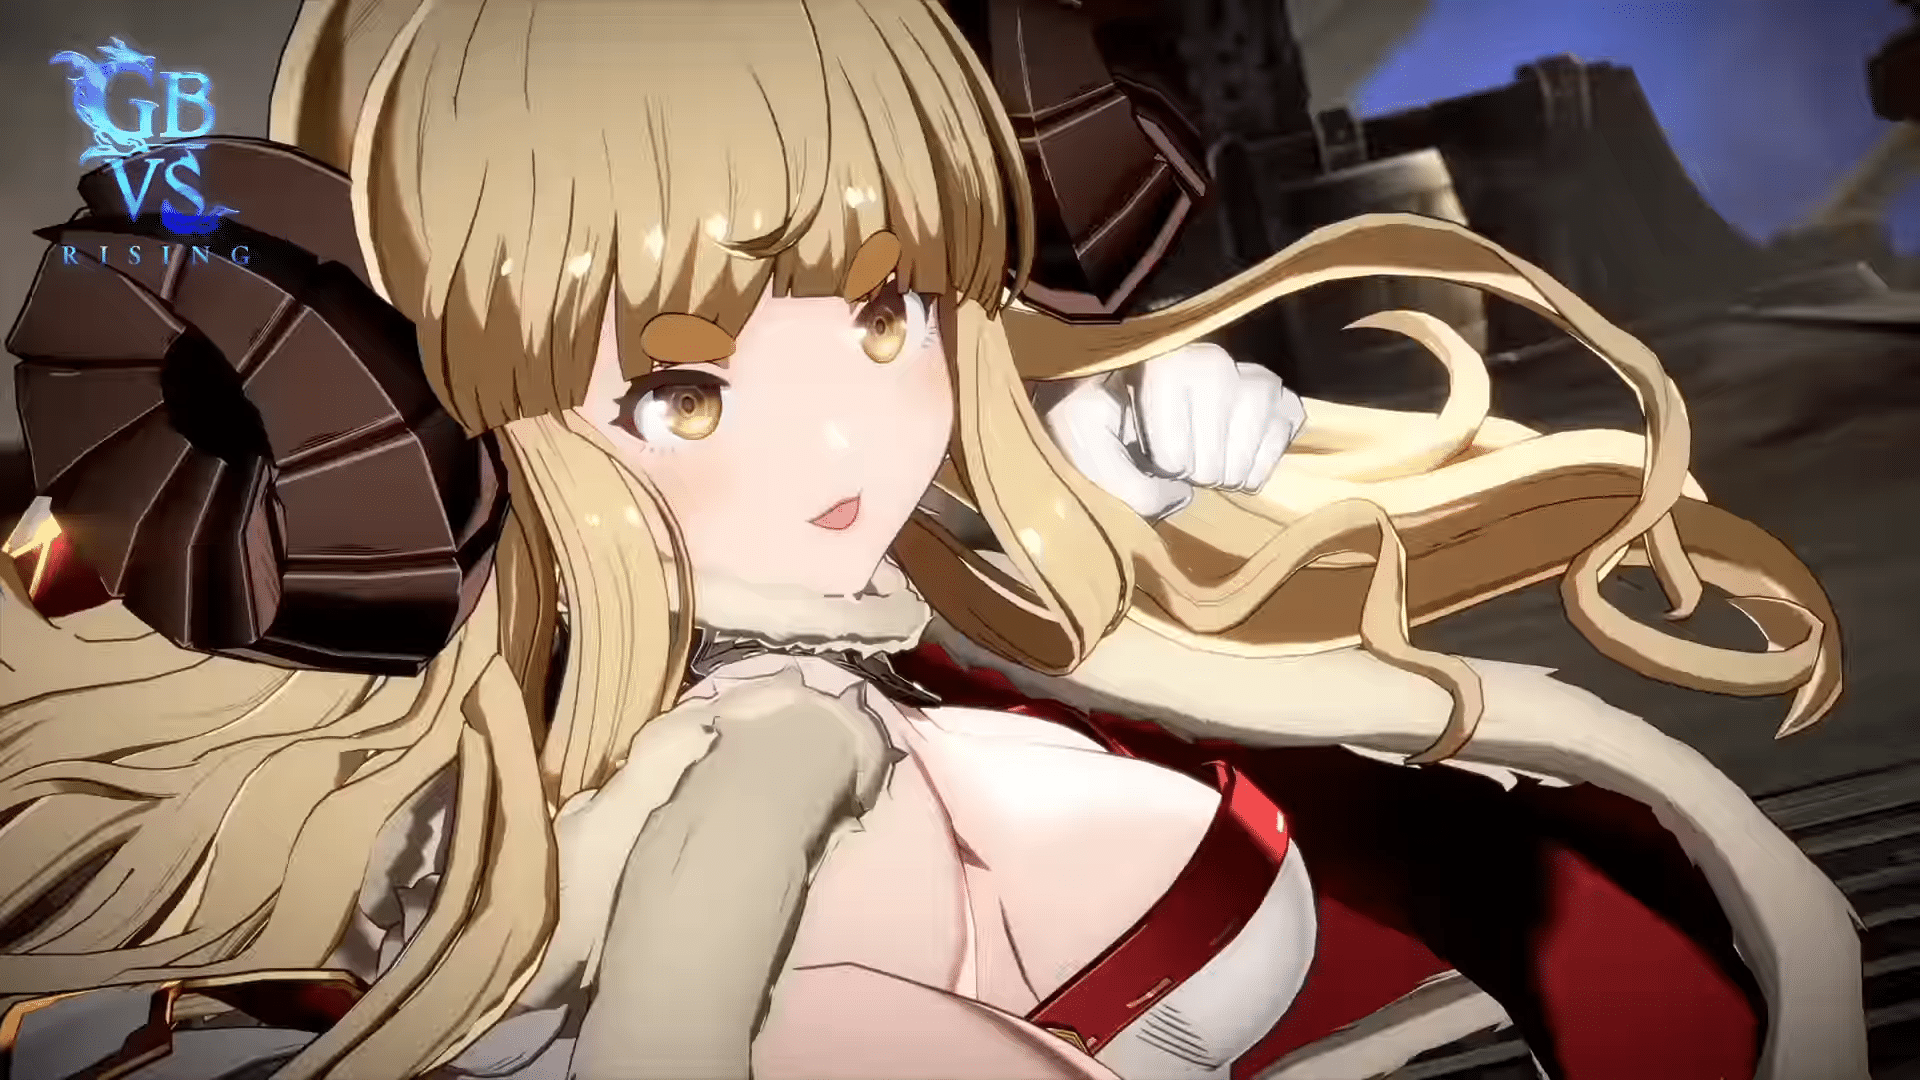 Granblue Fantasy Versus: Rising gets PlayStation online open beta in May